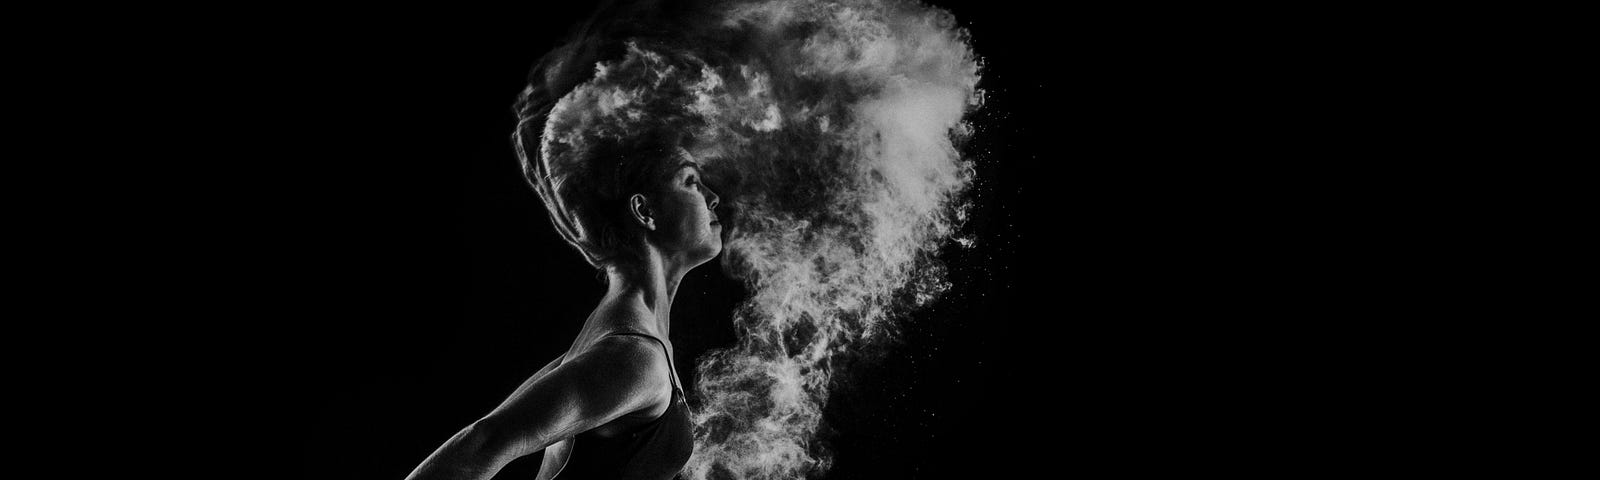 A woman underwater with her hair flowing and water exploding around her